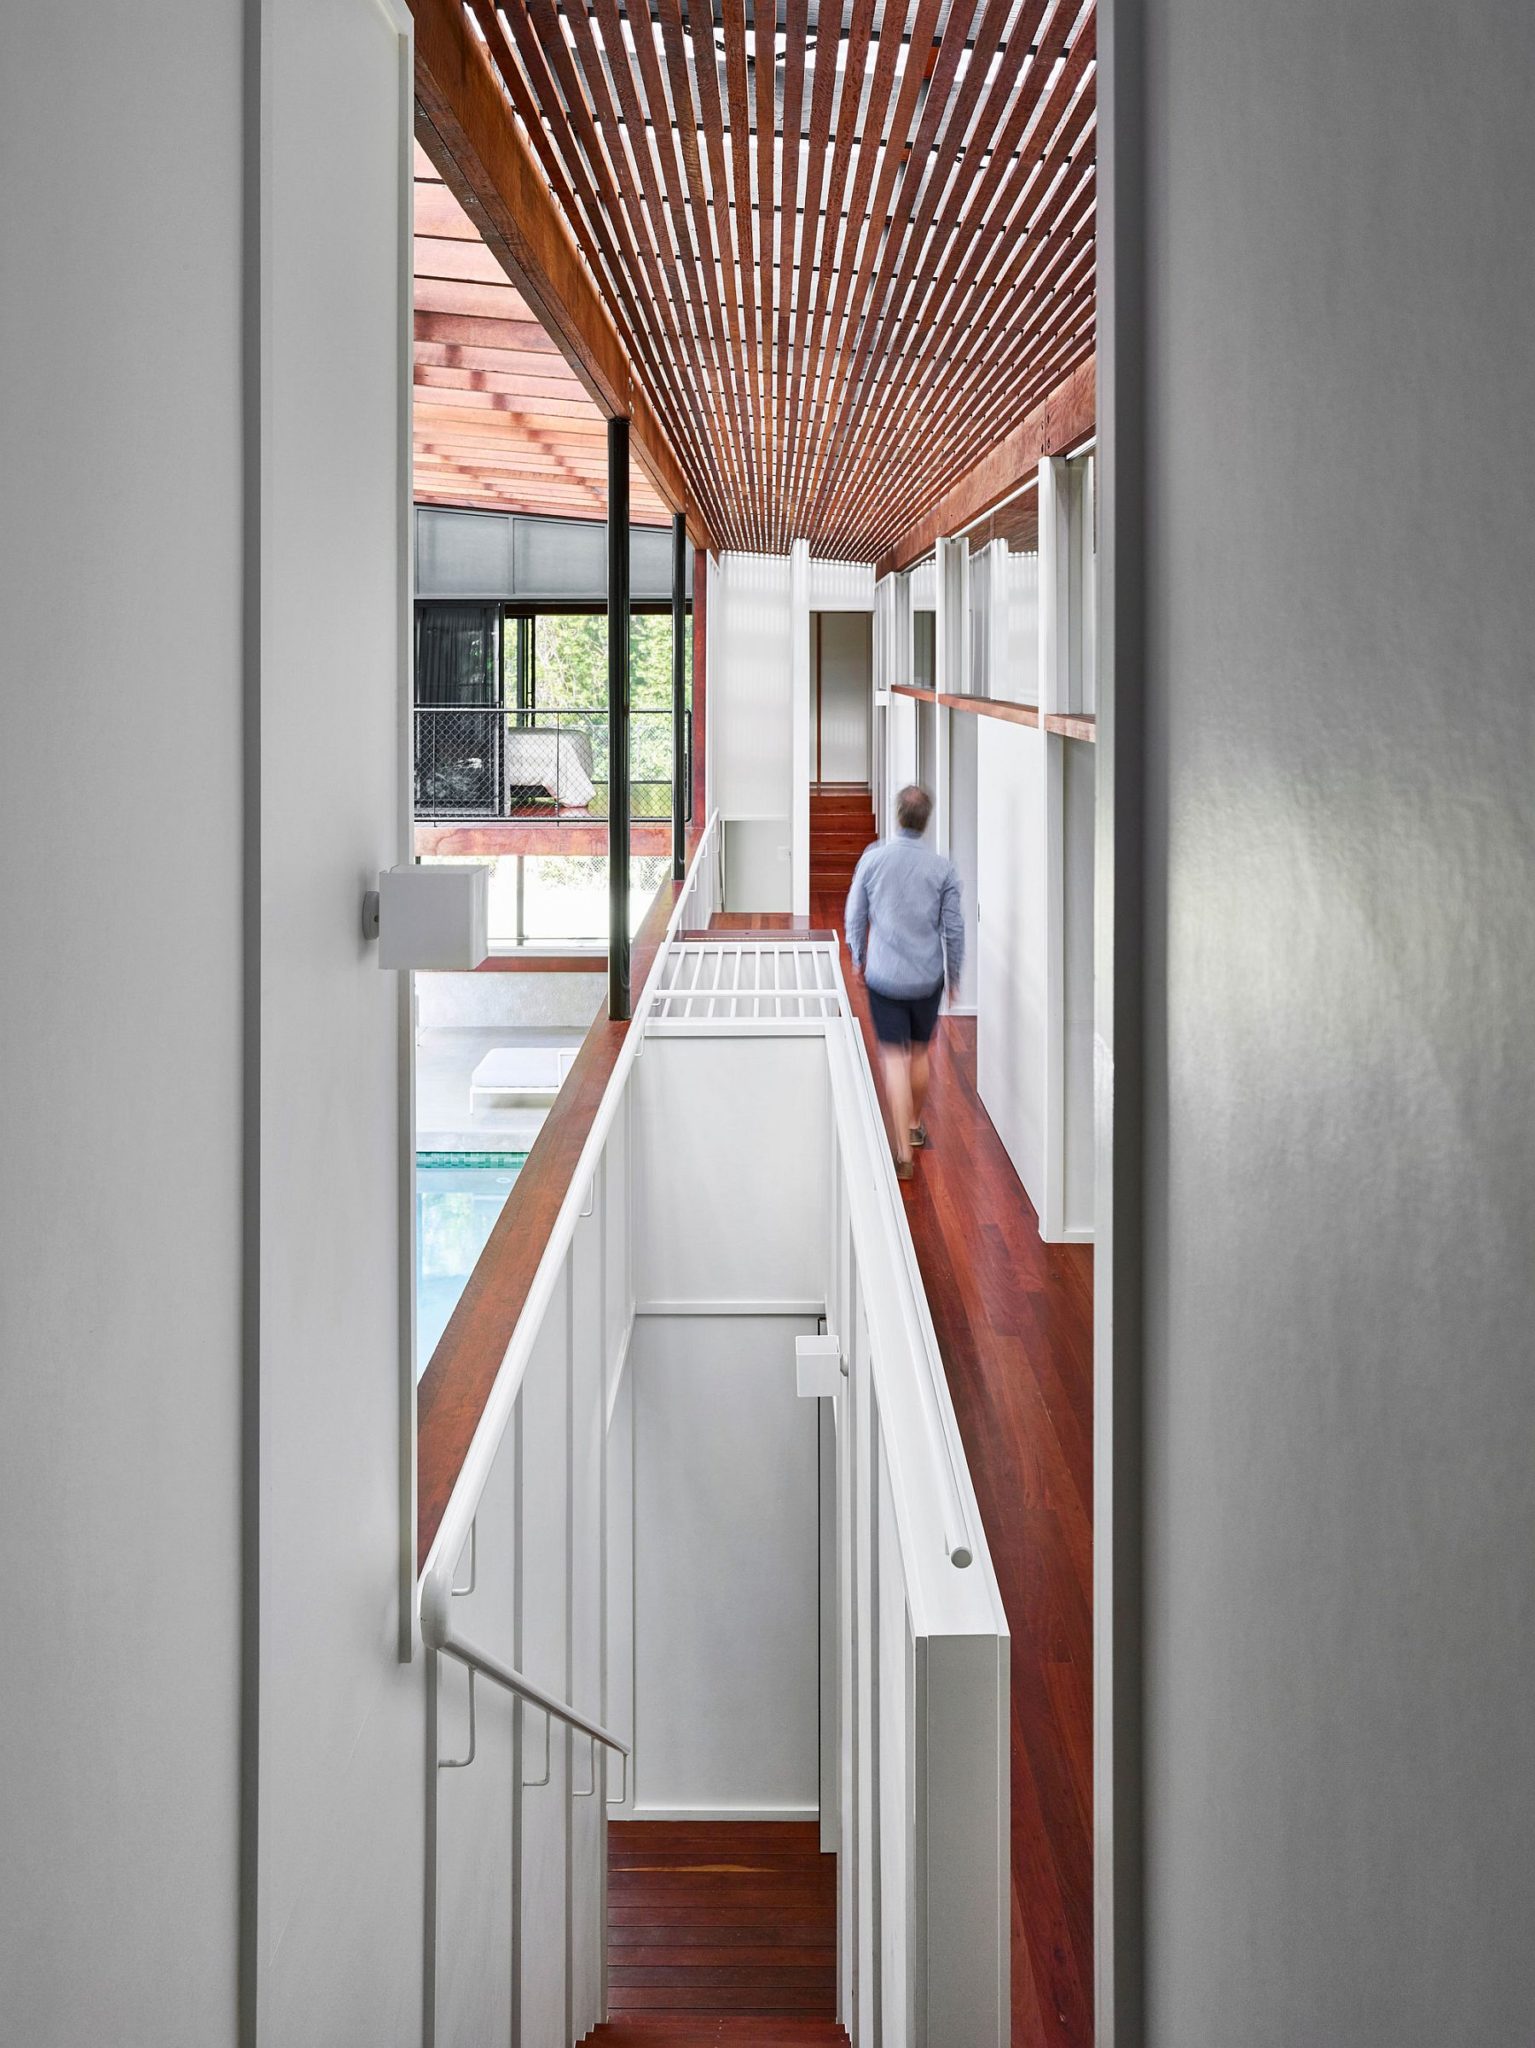 Sweeping corridors and light-filled interior of the Aussie home